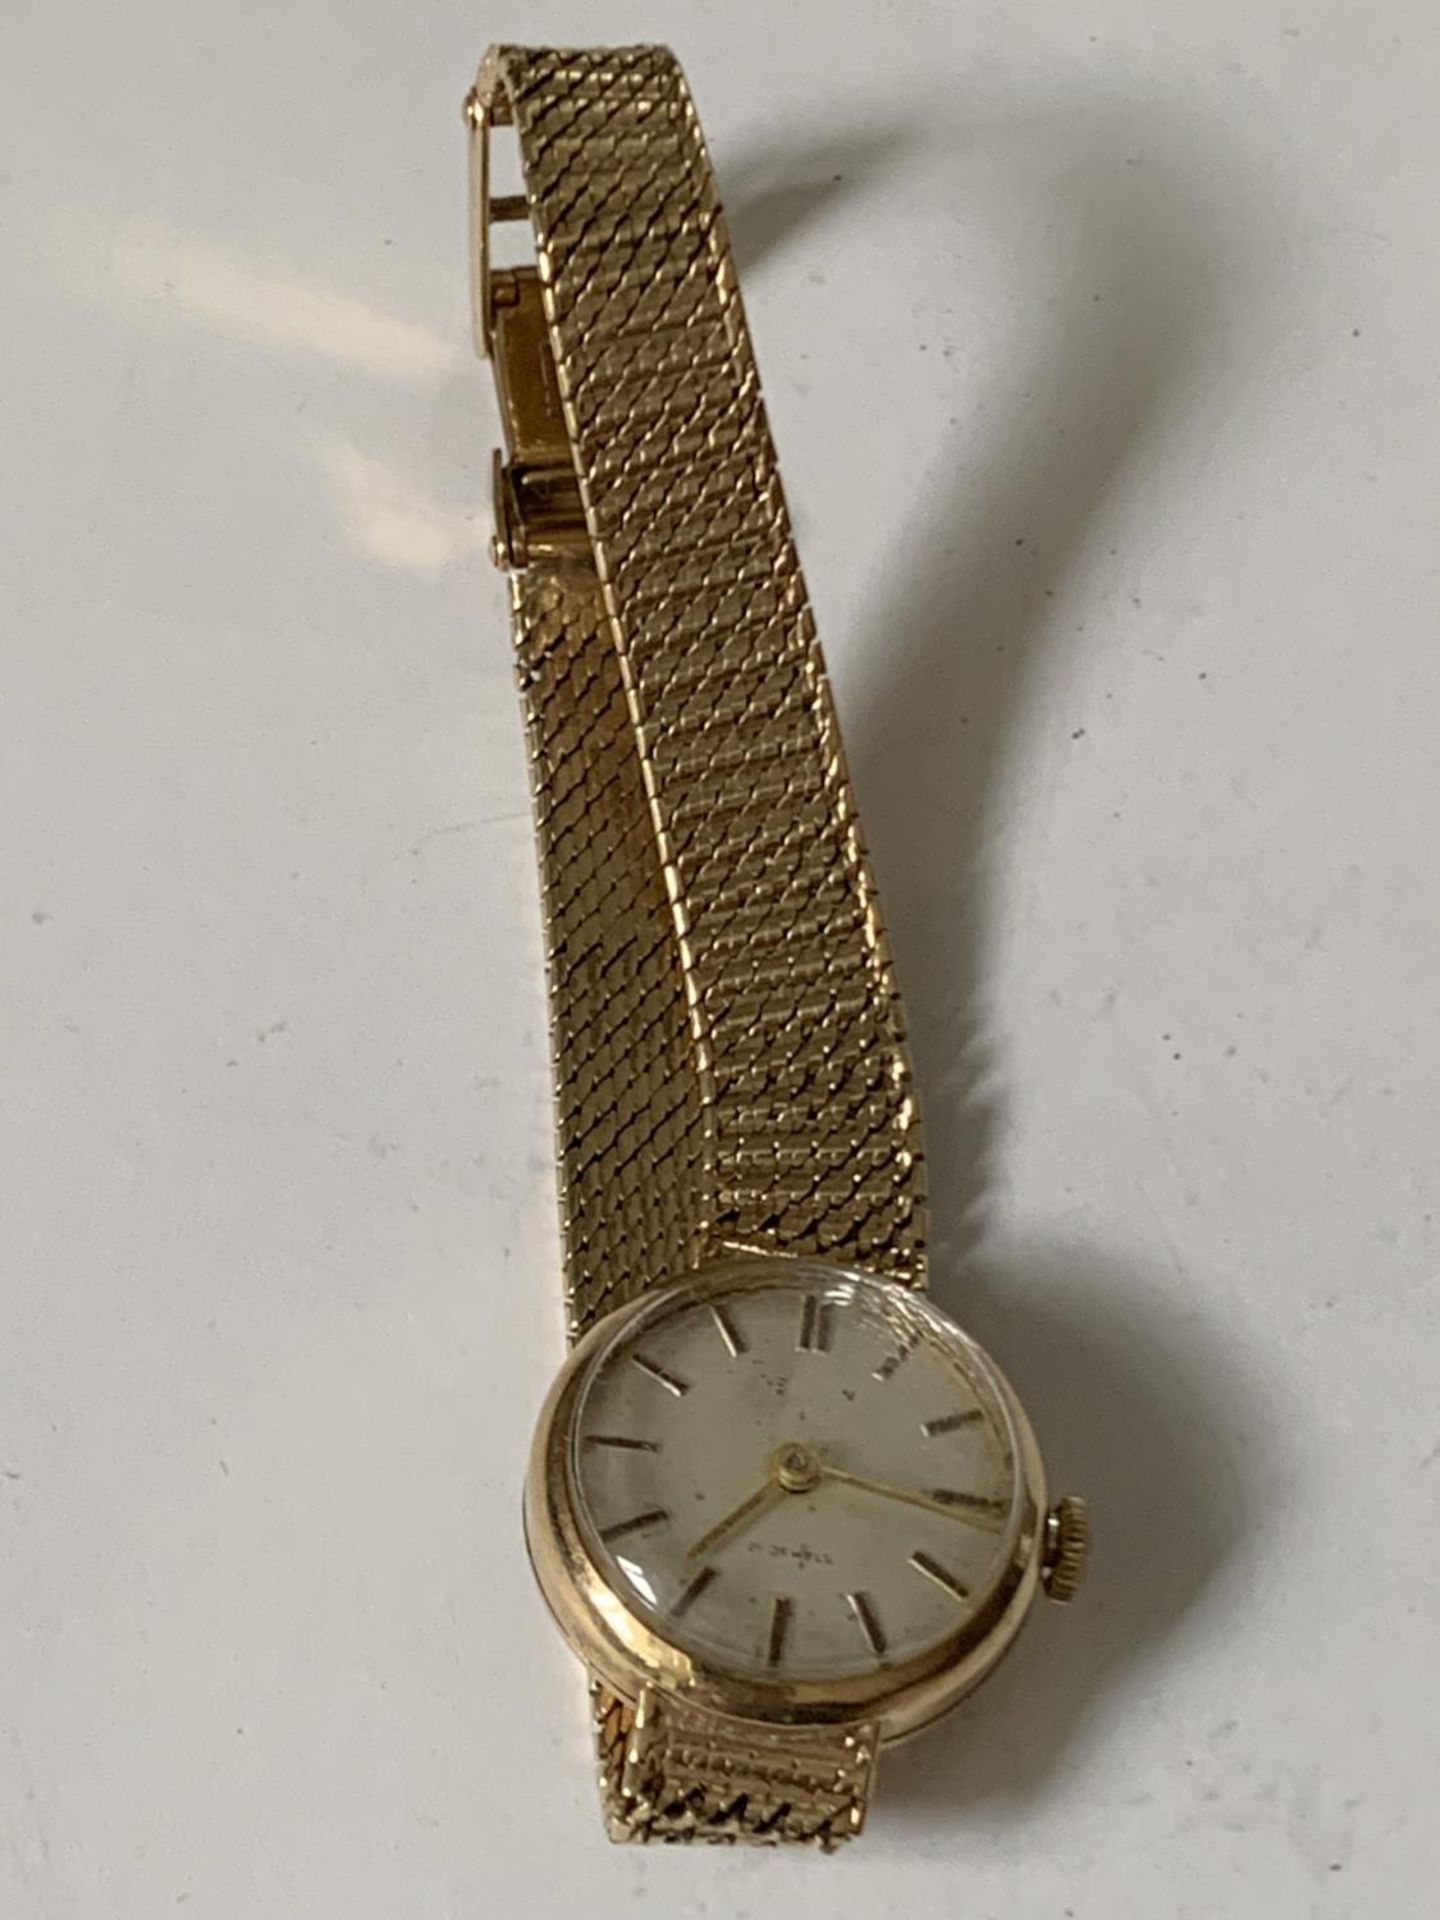 A LADIES VINTAGE 9 CARAT GOLD WRIST WATCH WITH 9 CARAT GOLD STRAP GROSS WEIGHT 16.86 GRAMS